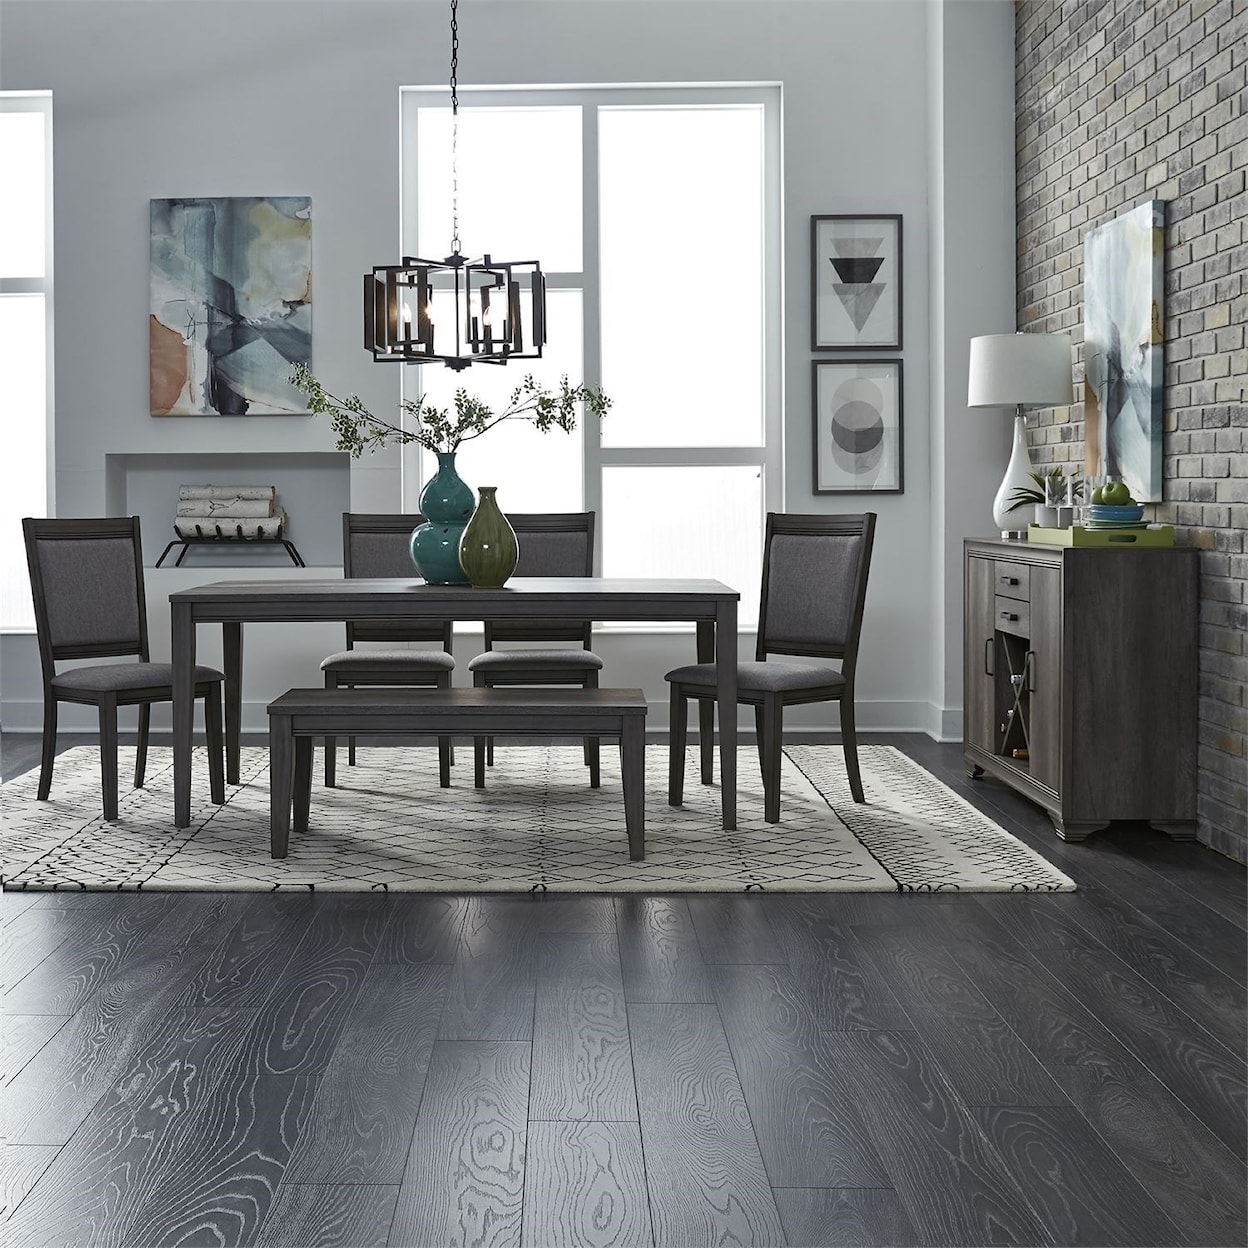 Liberty Furniture Tanners Creek Dining Room Group